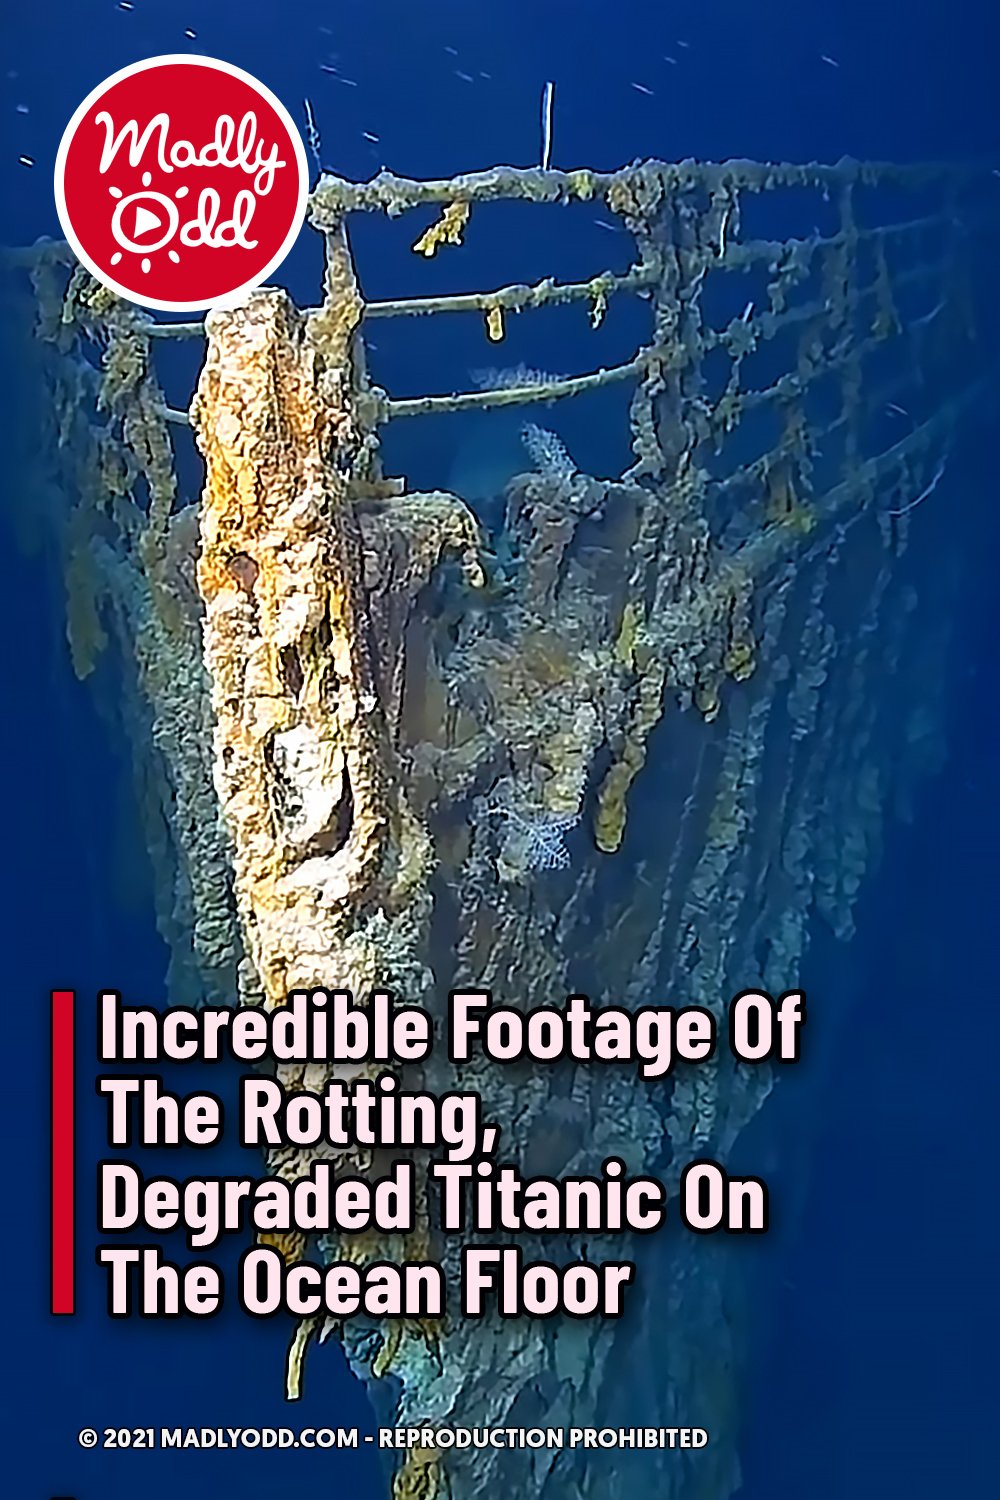 Incredible Footage Of The Rotting, Degraded Titanic On The Ocean Floor